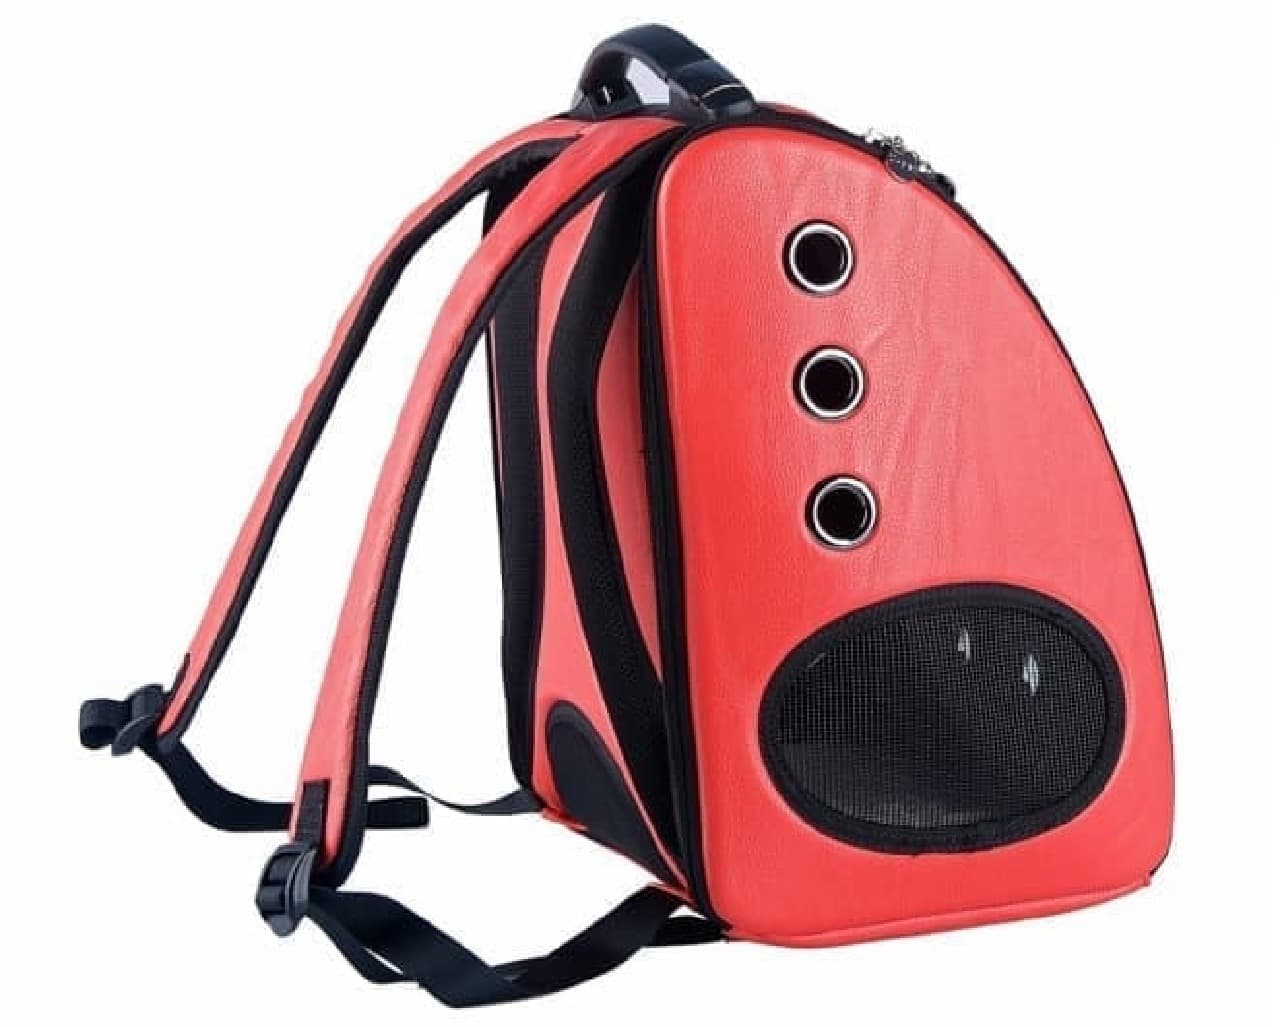 Pet carry sold by "U-pet" will satisfy the curiosity of cats